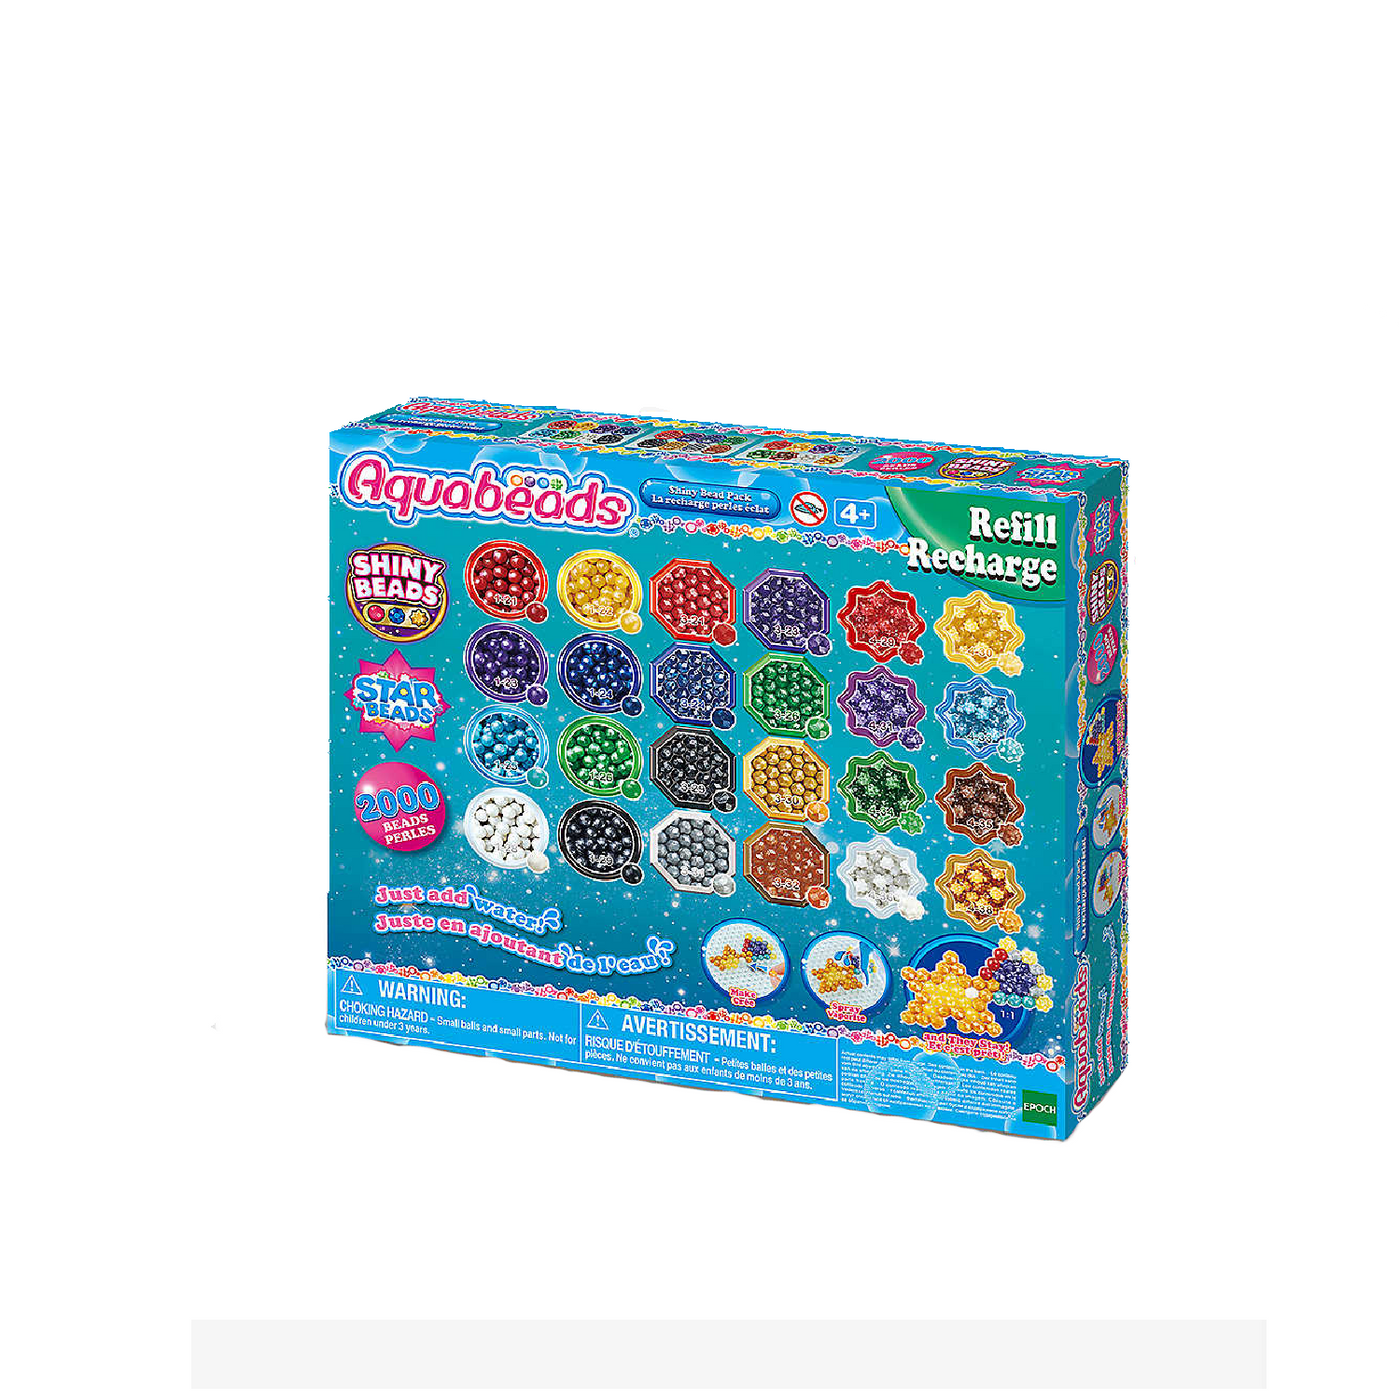 Aquabeads® Keychain Designer Party Pack